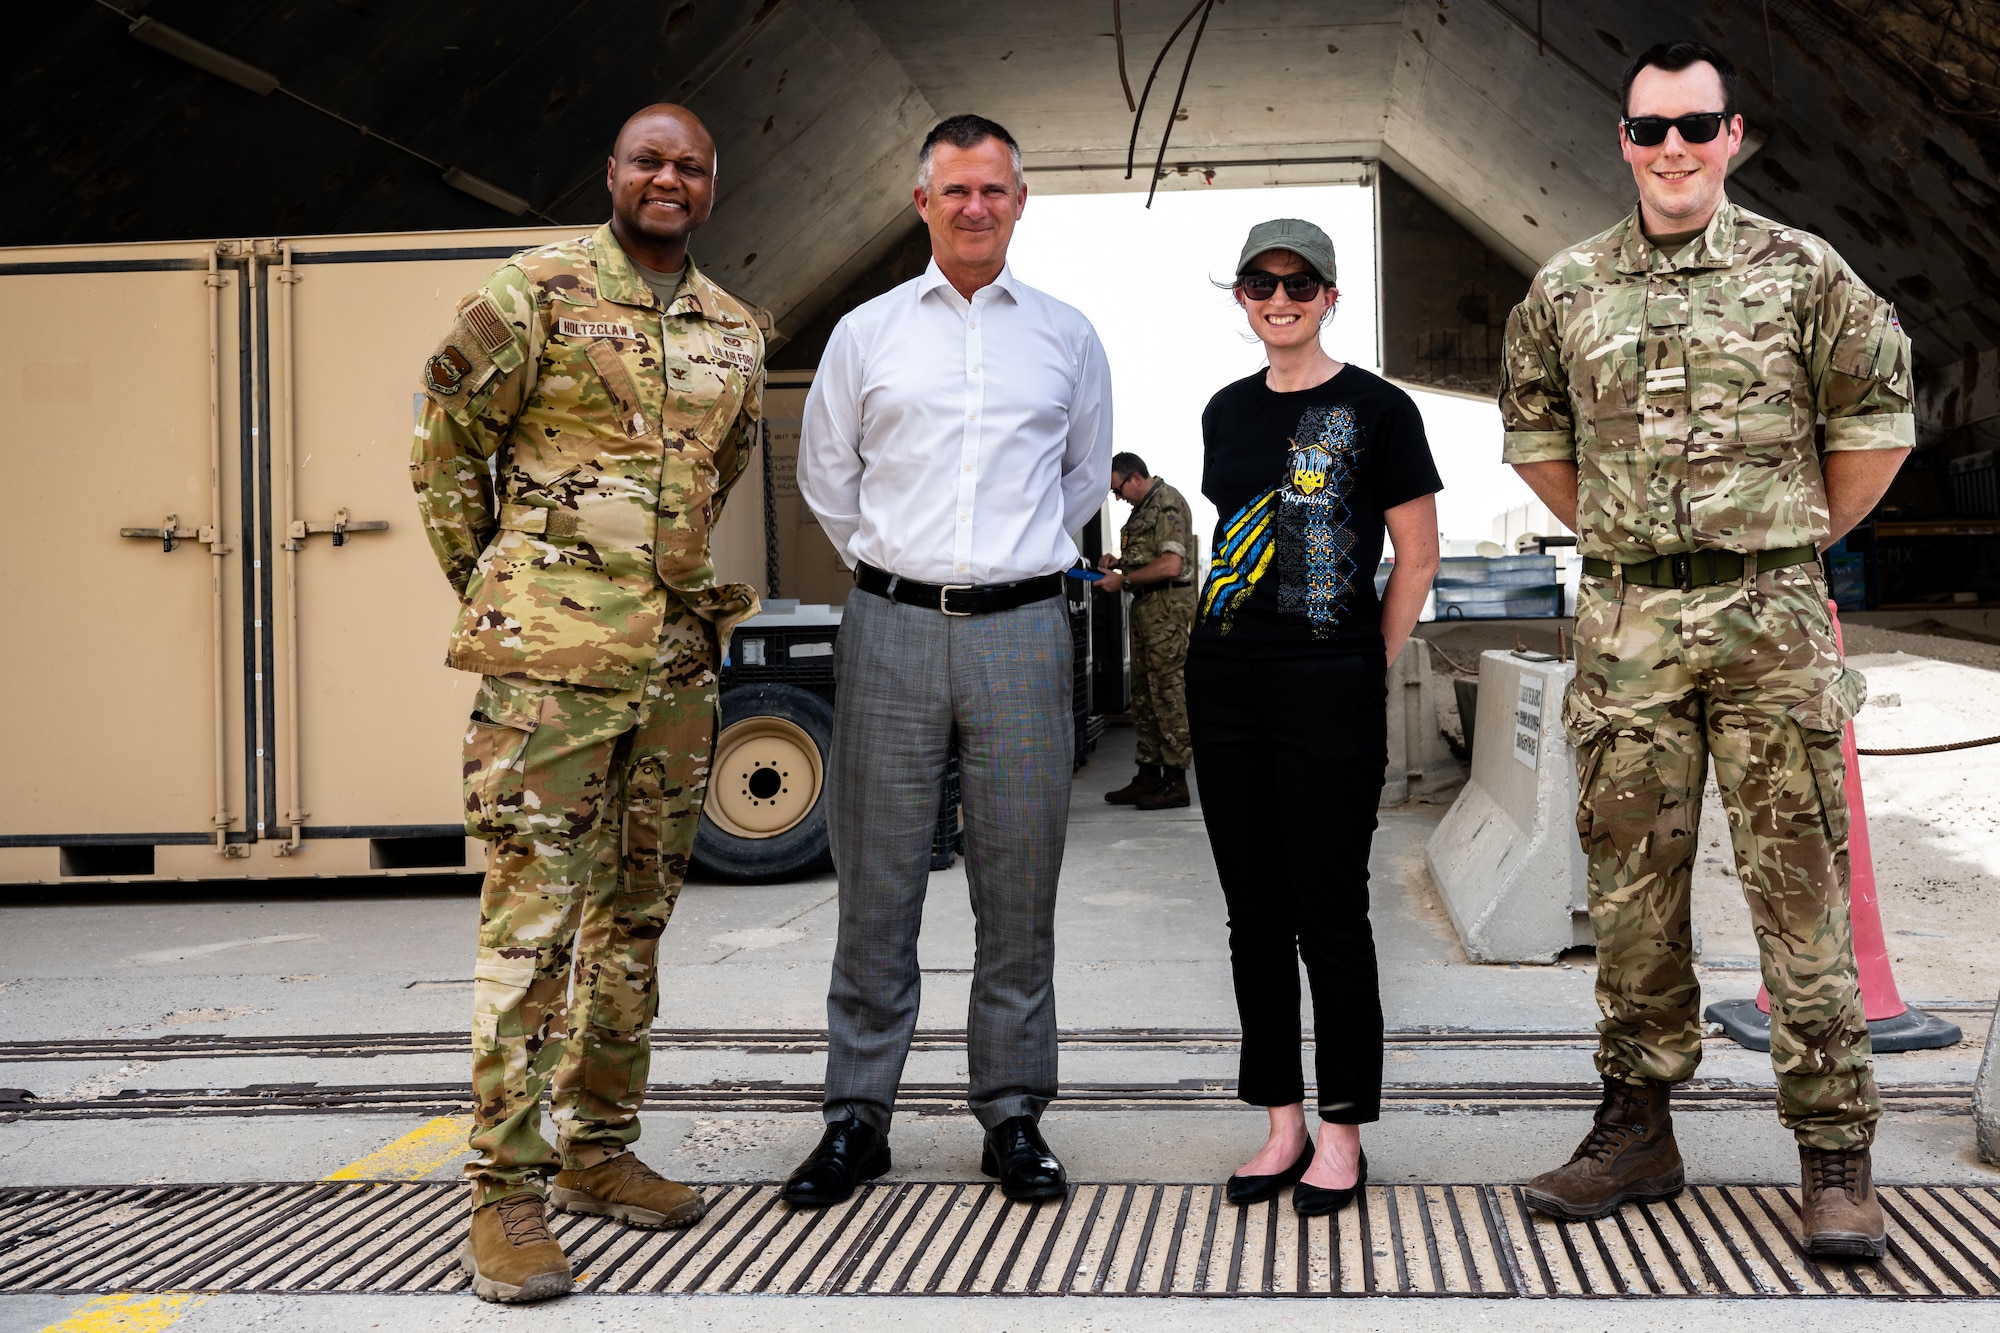 From left, U.S. Air Force Col. Damion Holtzclaw, 386th Air Expeditionary Wing deputy commander, Lord Mark Lancaster, United Kingdom Government’s Defence Export Advocate, and Ambassador Belinda Lewis, British Ambassador to Kuwait, and Royal Air Force Flight Lieutenant Nicholas Lloyd pose for a photo at Ali Al Salem Air Base, Kuwait, July 4, 2023. A group of U.K. leaders traveled to Kuwait to foster the working relationship between the U.K. and their Kuwaiti partners, and the visit also provided the opportunity for the U.S. to further the connection with our coalition partners on a strategic level. (U.S. Air Force photo by Staff Sgt. Kevin Long)